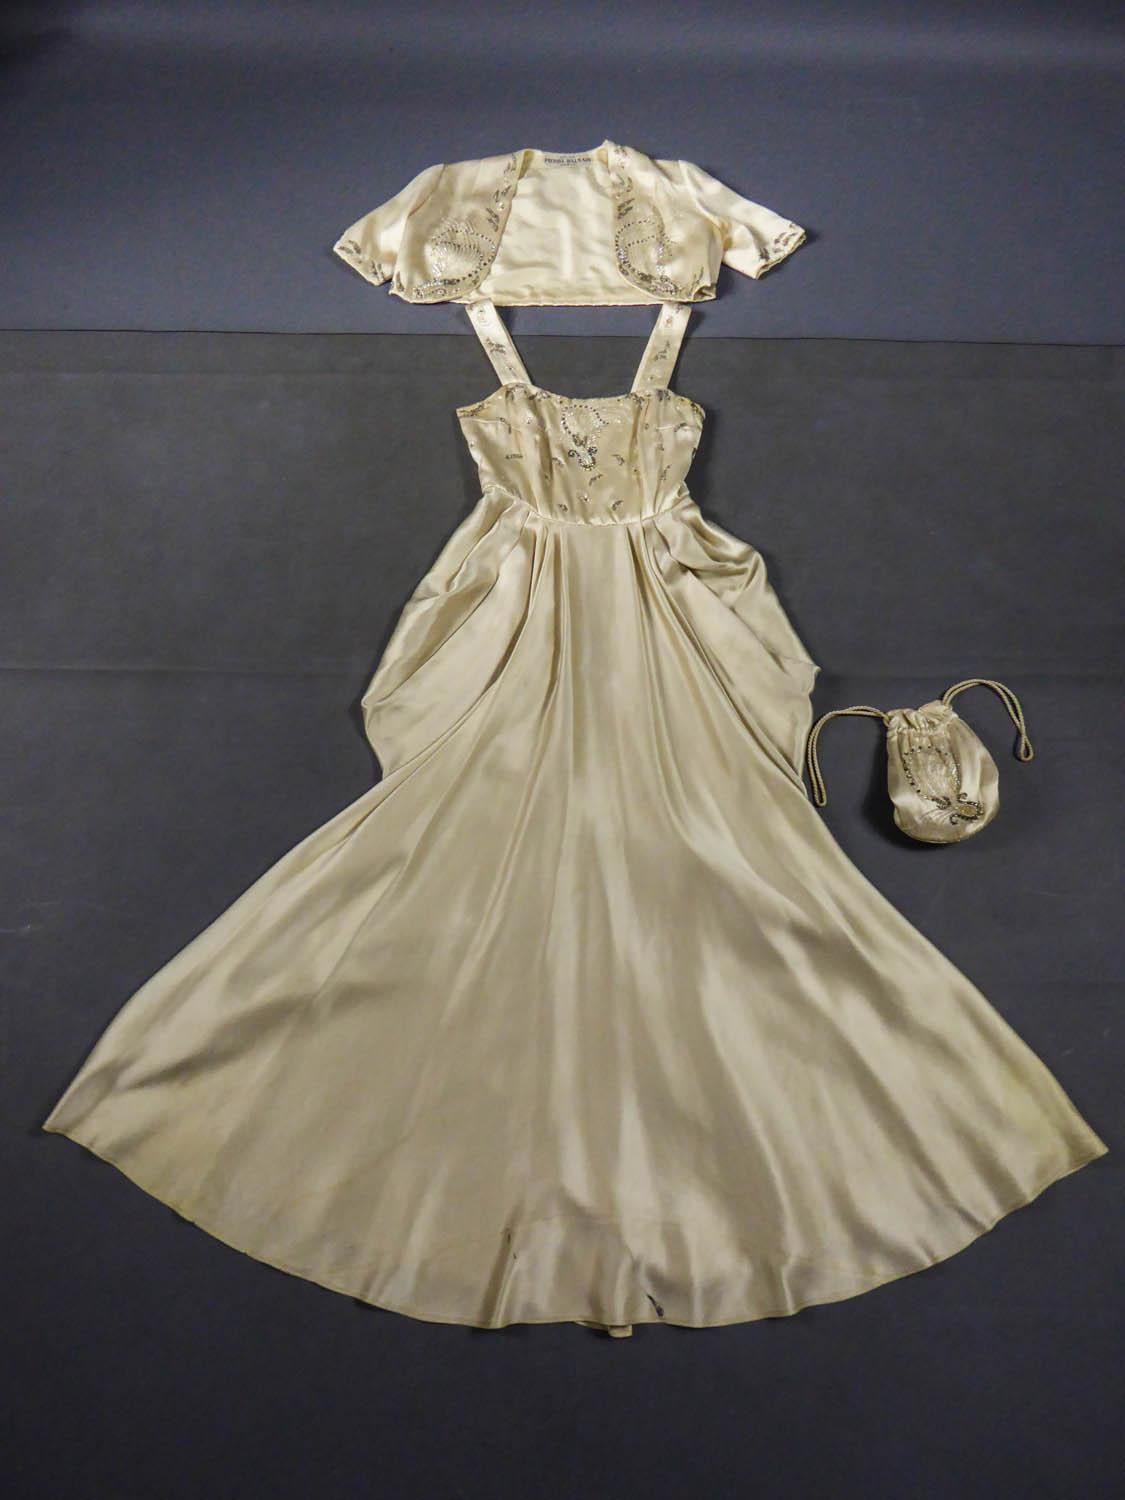 Circa 1950
France

Pierre Balmain Paris evening or ceremony dress with matching bolero and purse from the 1950s. Ivory Duchess satin embroidered with white and silver tulbular pearls, cultured pearls, silver sequins and iridescent sequins. Bolero